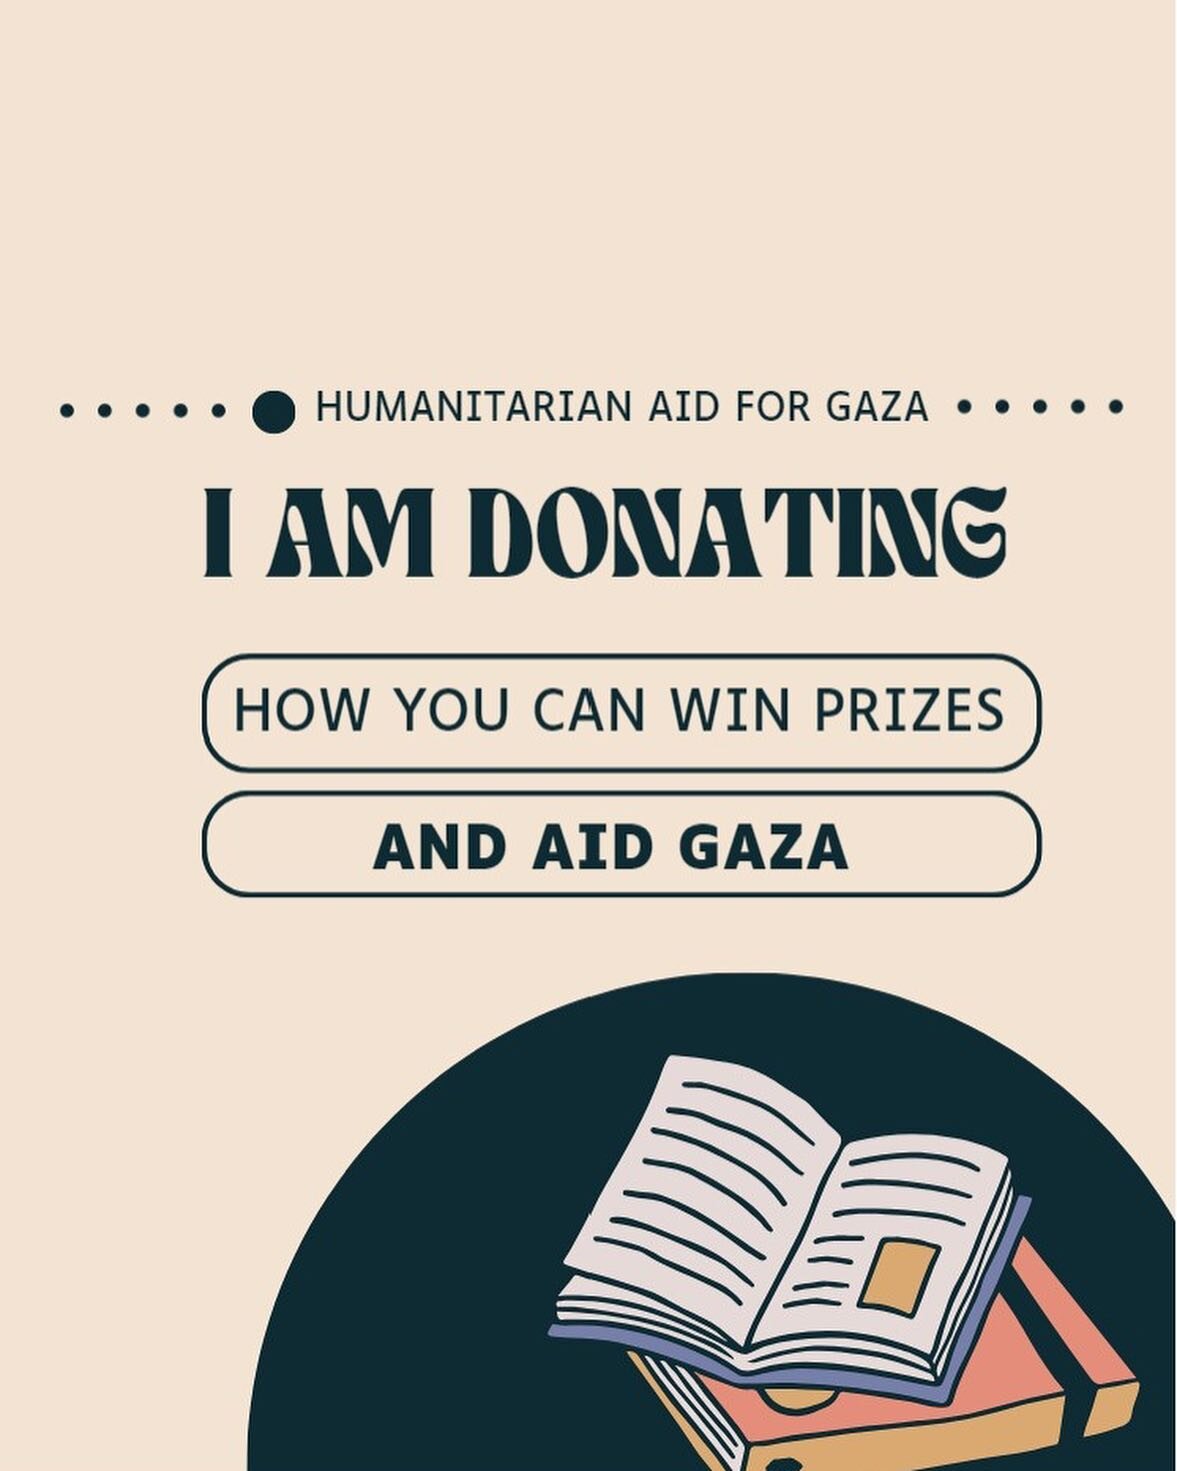 @faecrate and @foxandwit have organized a raffle to raise money for organizations that provide aid in Gaza. I&rsquo;m donating signed copies of Game Changer, Heated Rivalry, The Long Game and Time to Shine.  Link in bio. 🇵🇸